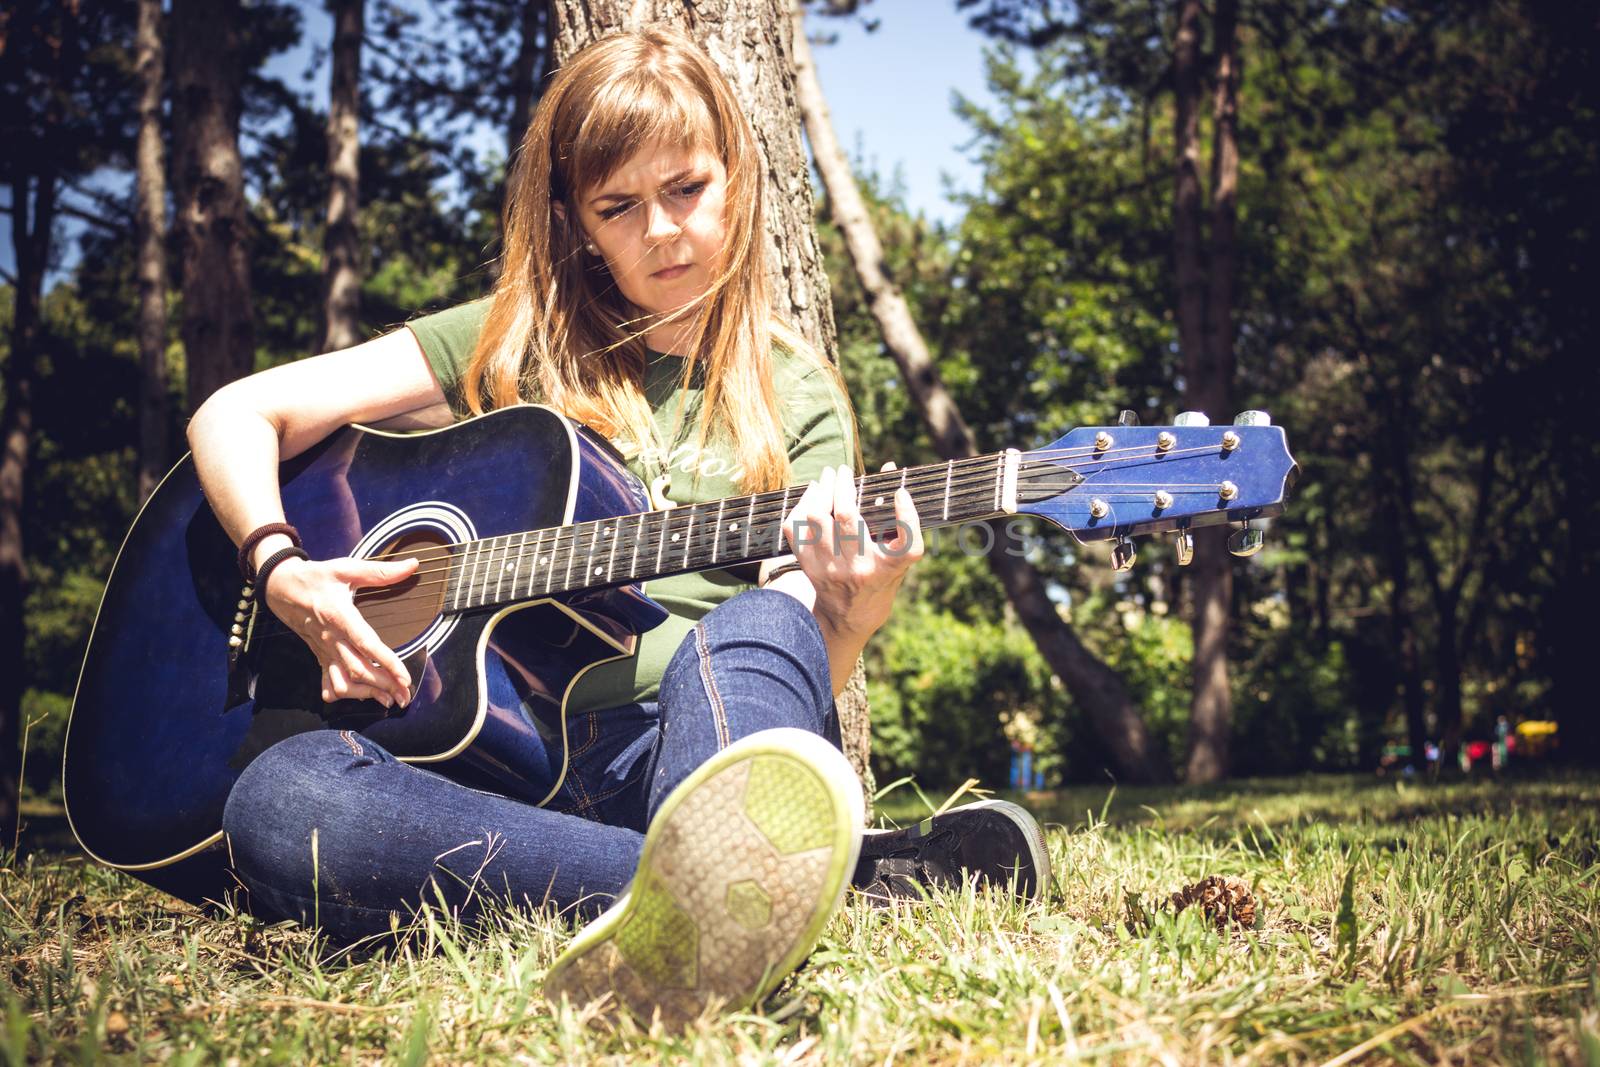 Girl singing to a guitar surrounded by trees in a park